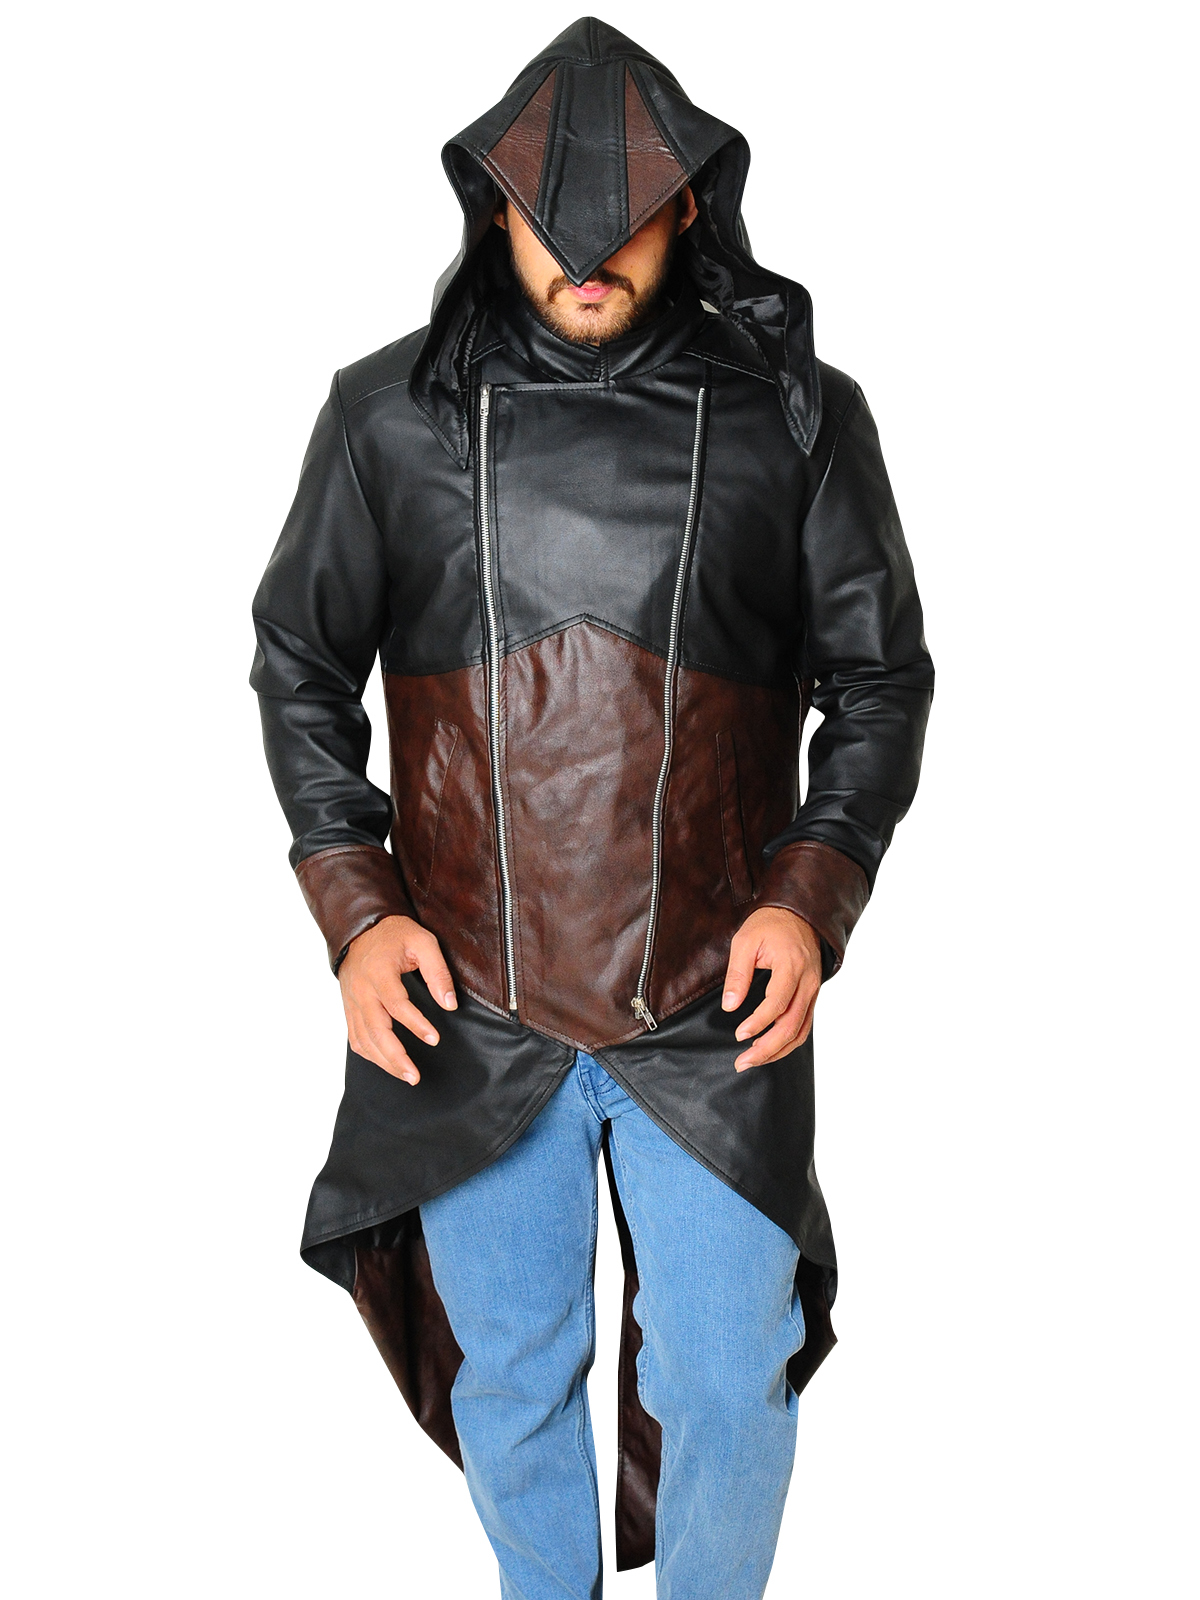 EXOTICA ASSASSINS CREED UNITY LEATHER HOODIE - ALL SIZES AVAILABLE ...